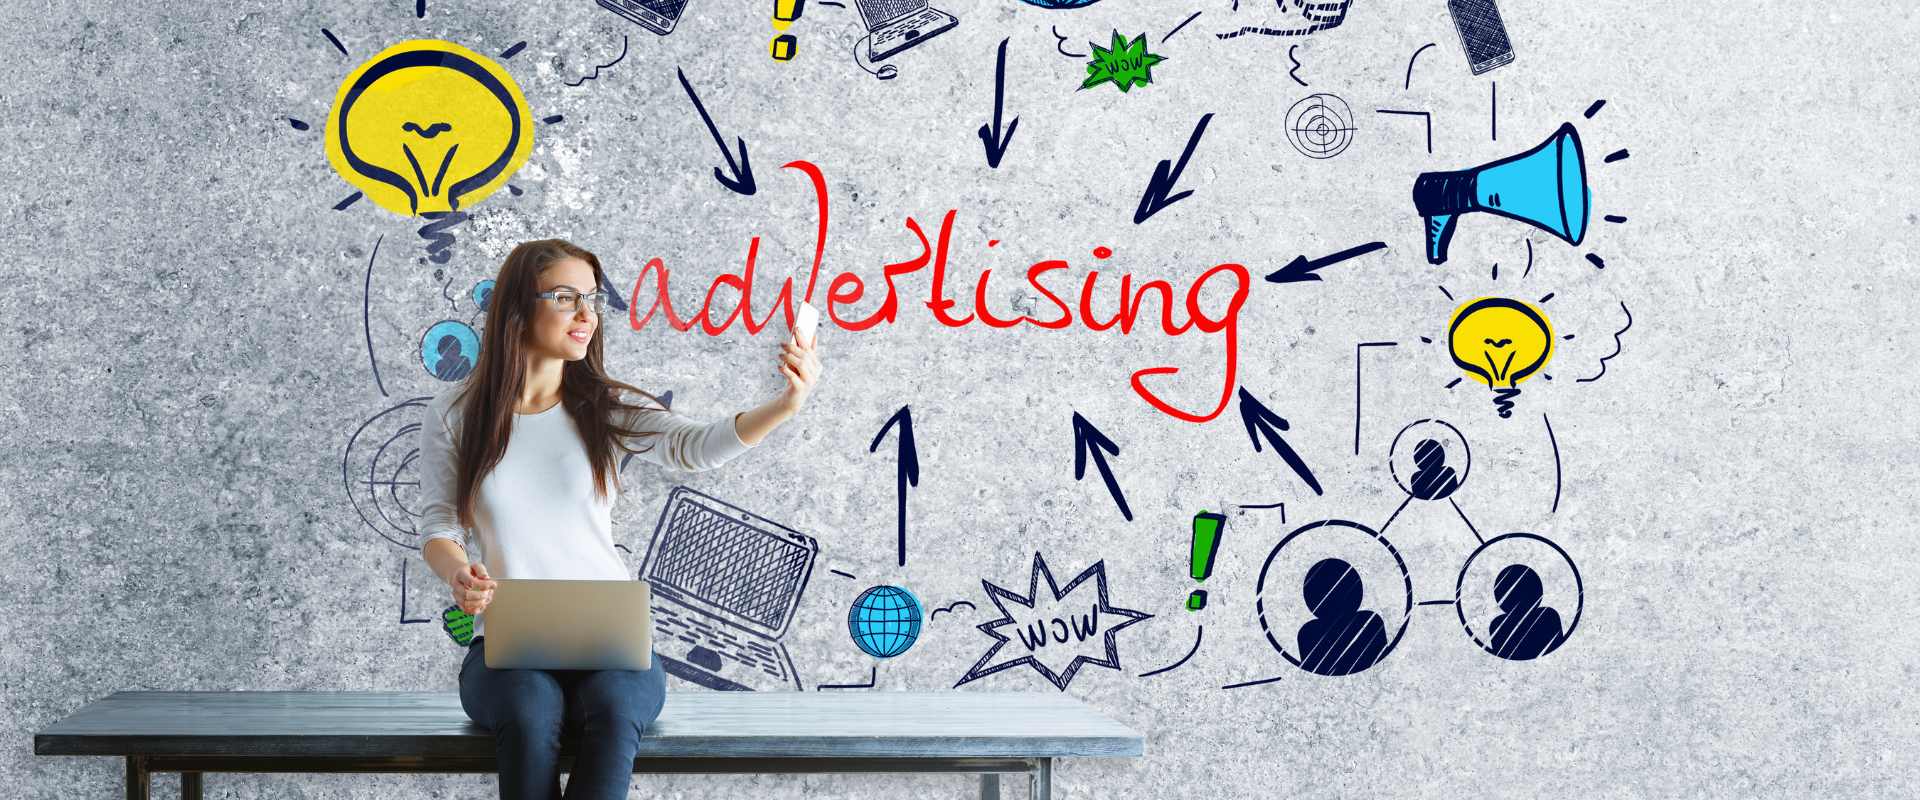 AI and ChatGPT in marketing and advertising by aimasterminds